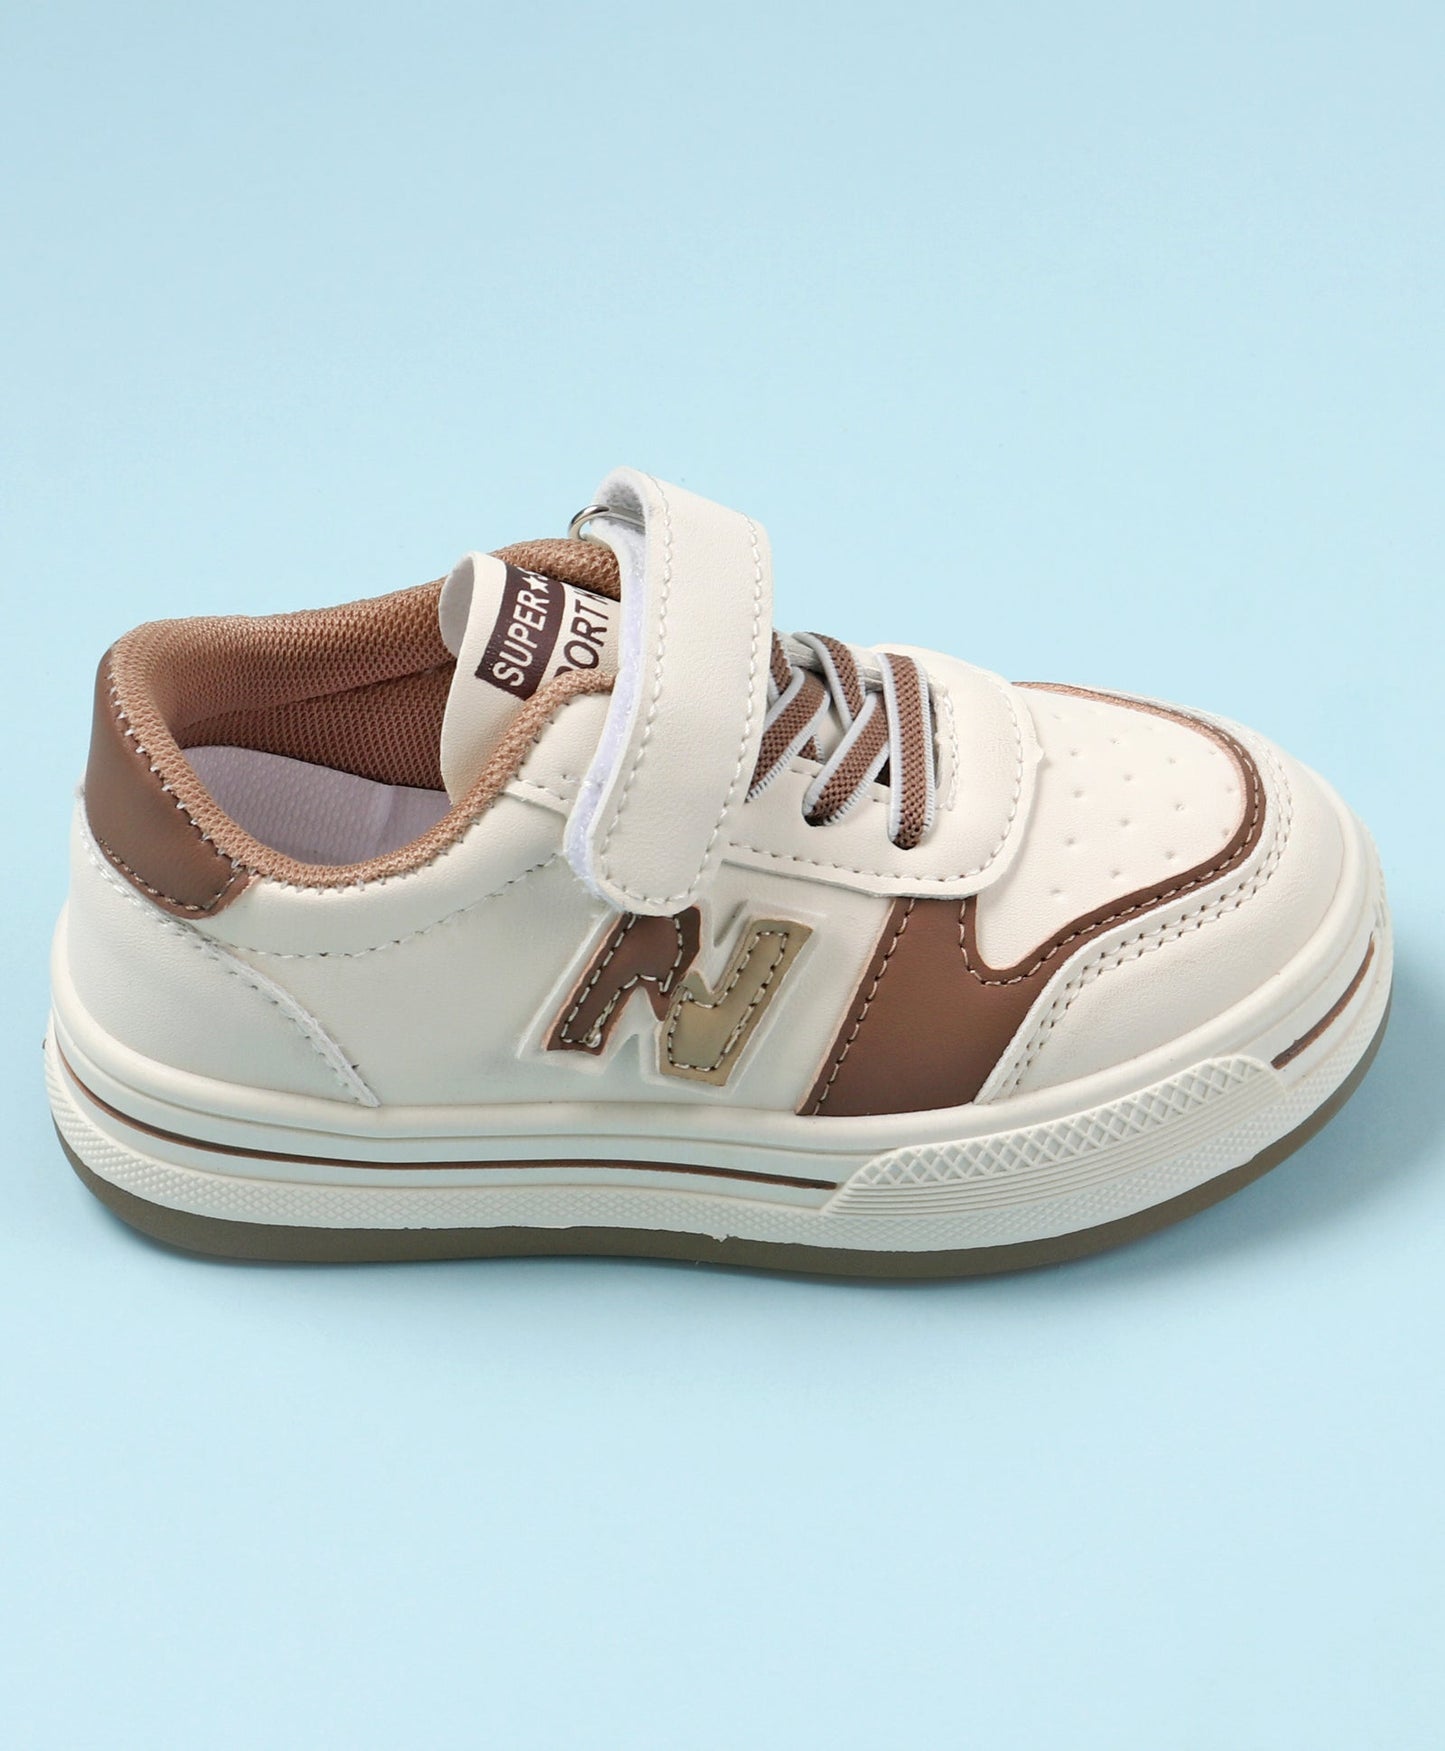 N PATCH VELCRO CLOSURE SNEAKERS - WHITE & PINK